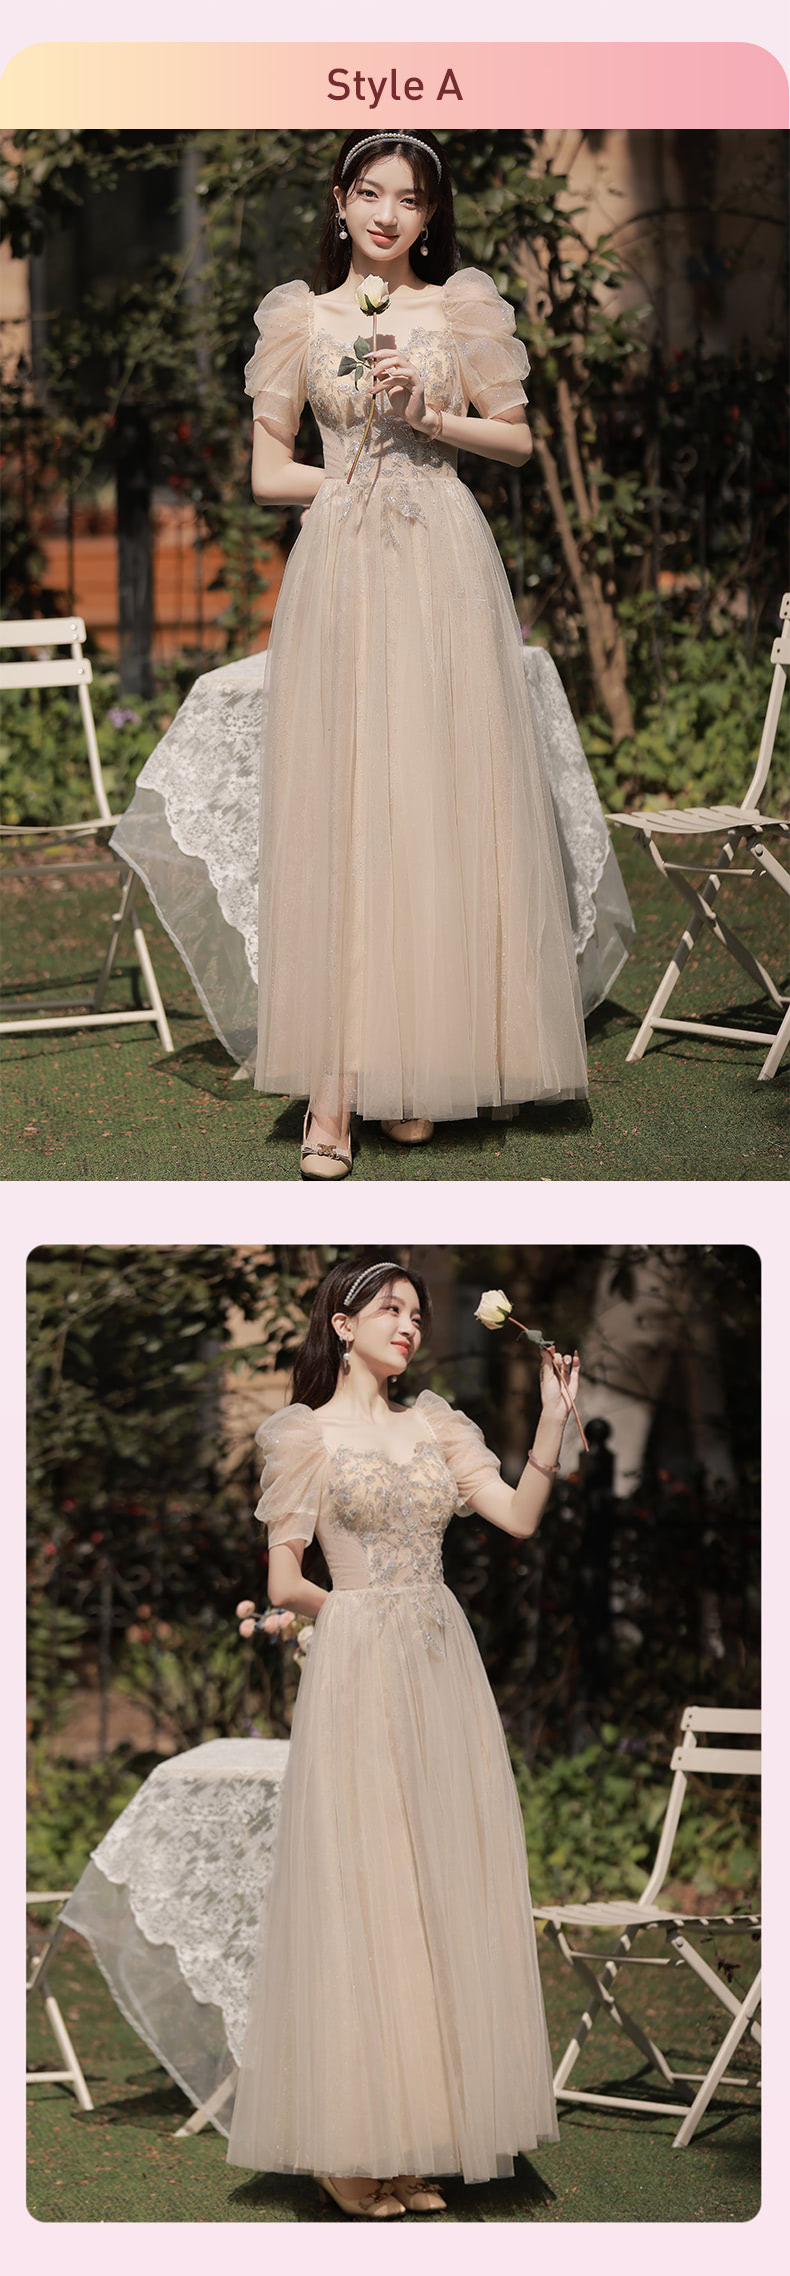 Formal-Apricot-Bridesmaid-Dress-Evening-Gown-for-Wedding-Party17.jpg